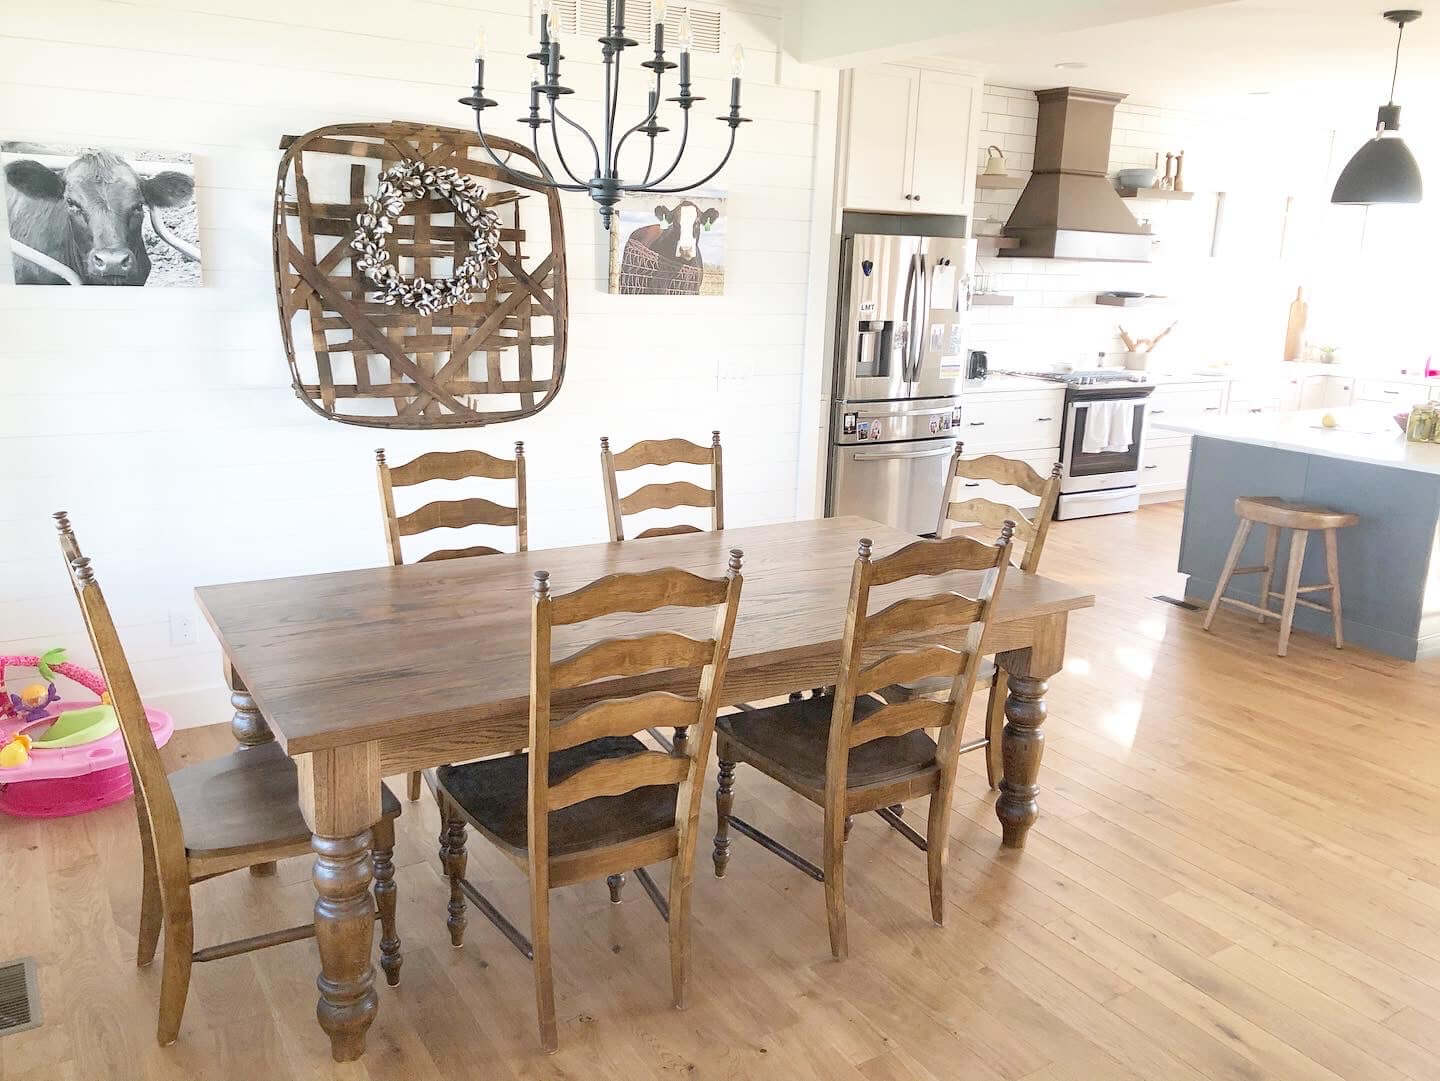 Pictured with a 7' L x 42" Red Oak stained Honey. Pictured with 6 Maine Ladder Back Chairs.